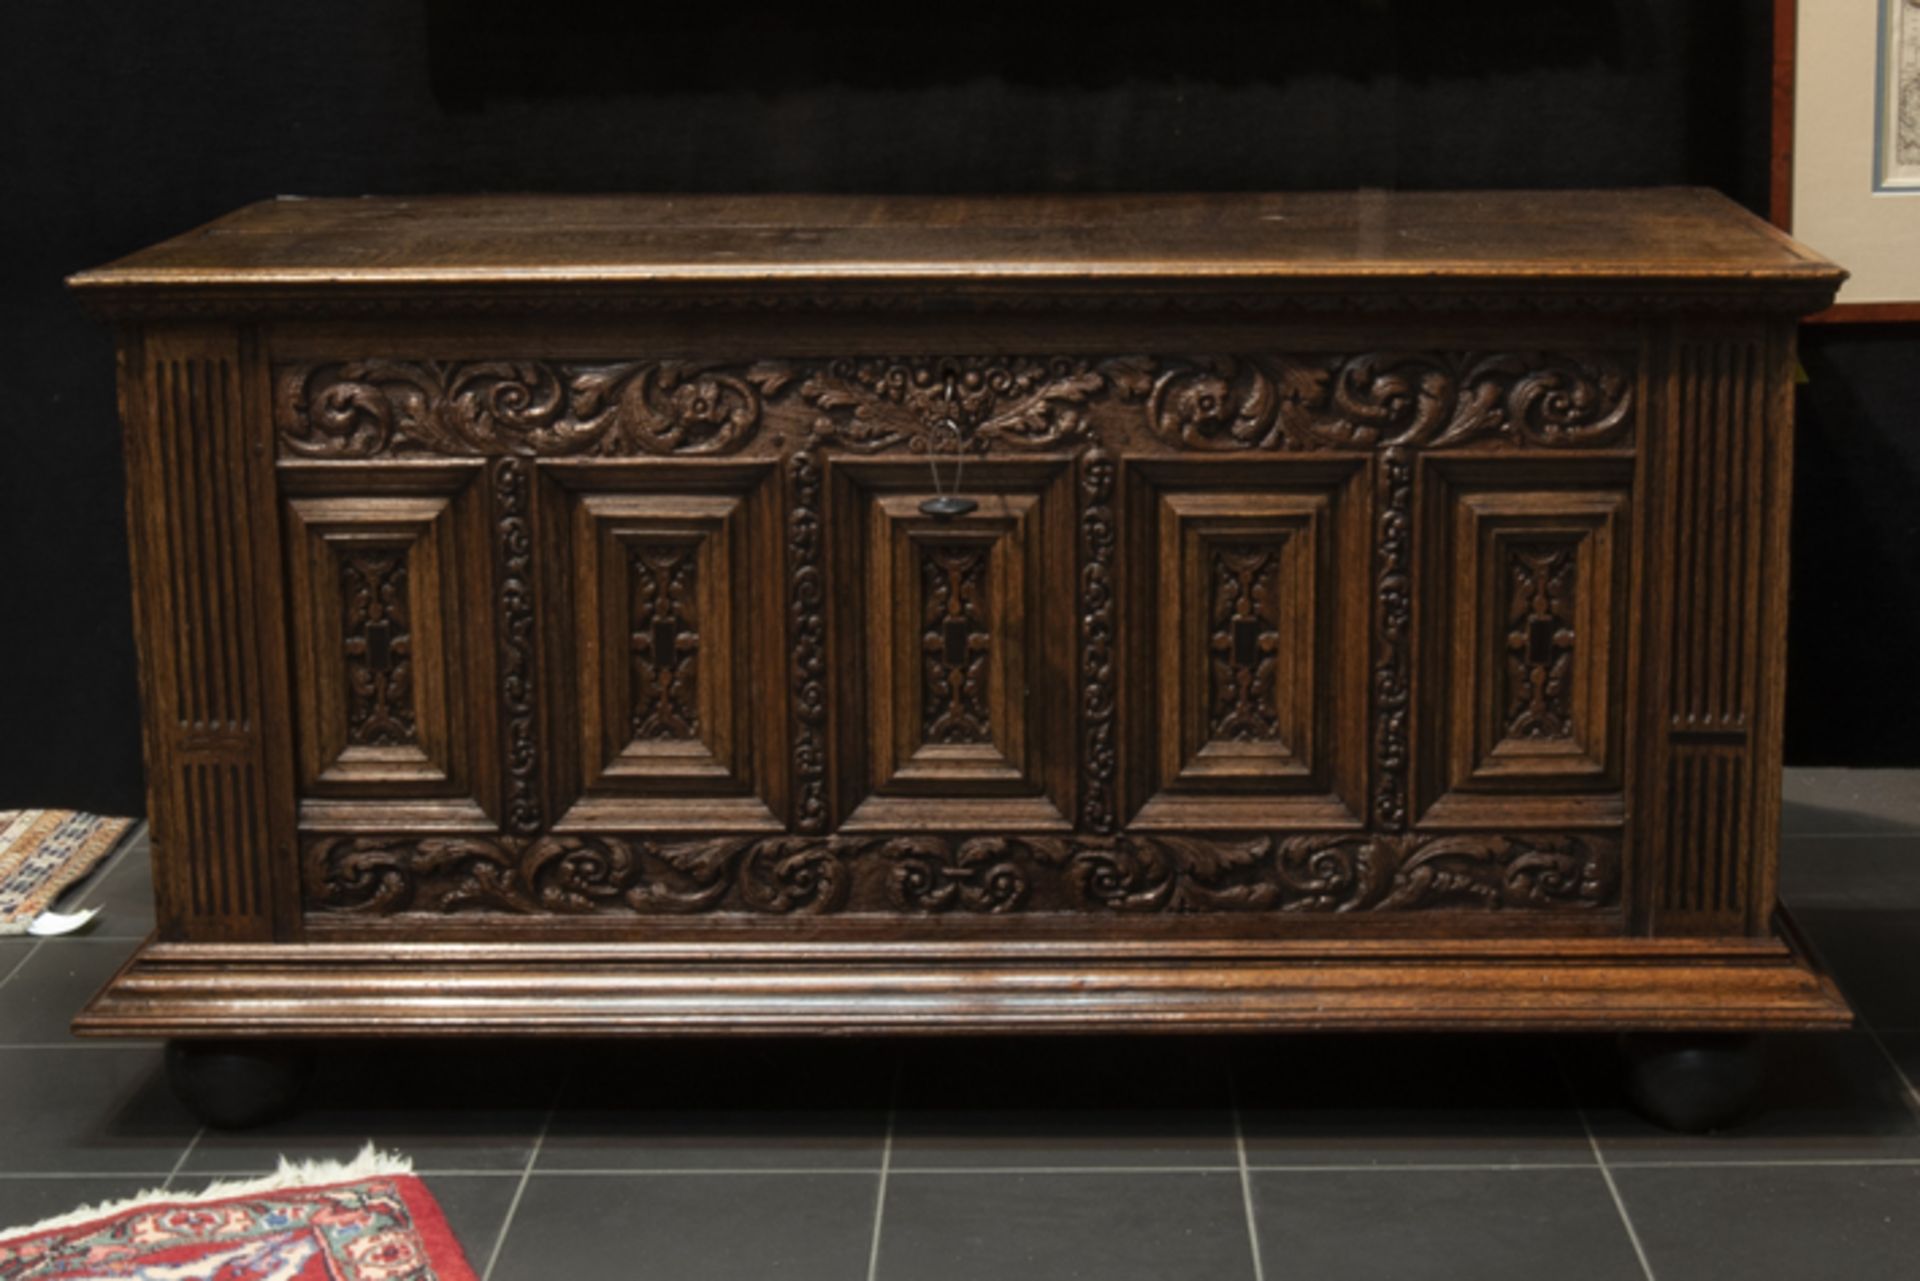 17th Cent. Renaissance style chest in oak and ebony adorned with finely sculpted panels